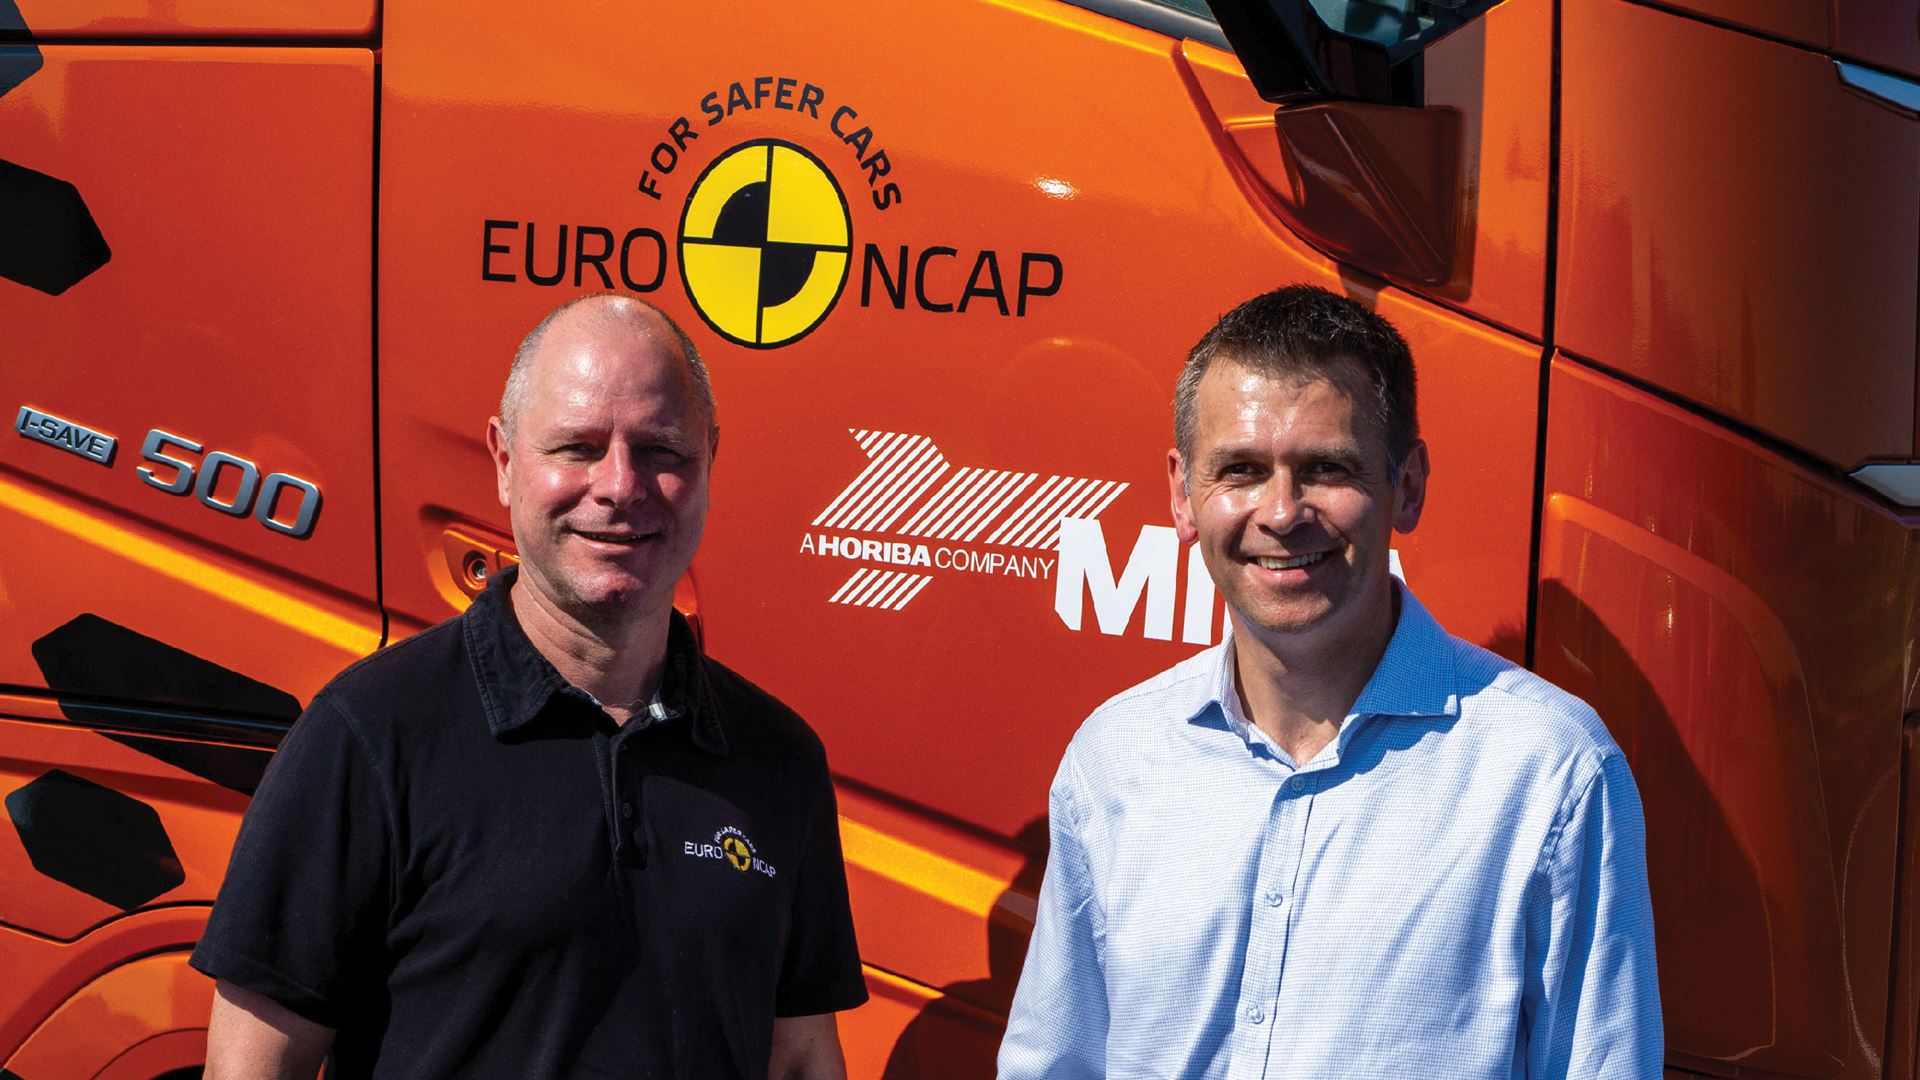 Euro NCAP strengthens cooperation with UK’s HORIBA MIRA in active safety testing